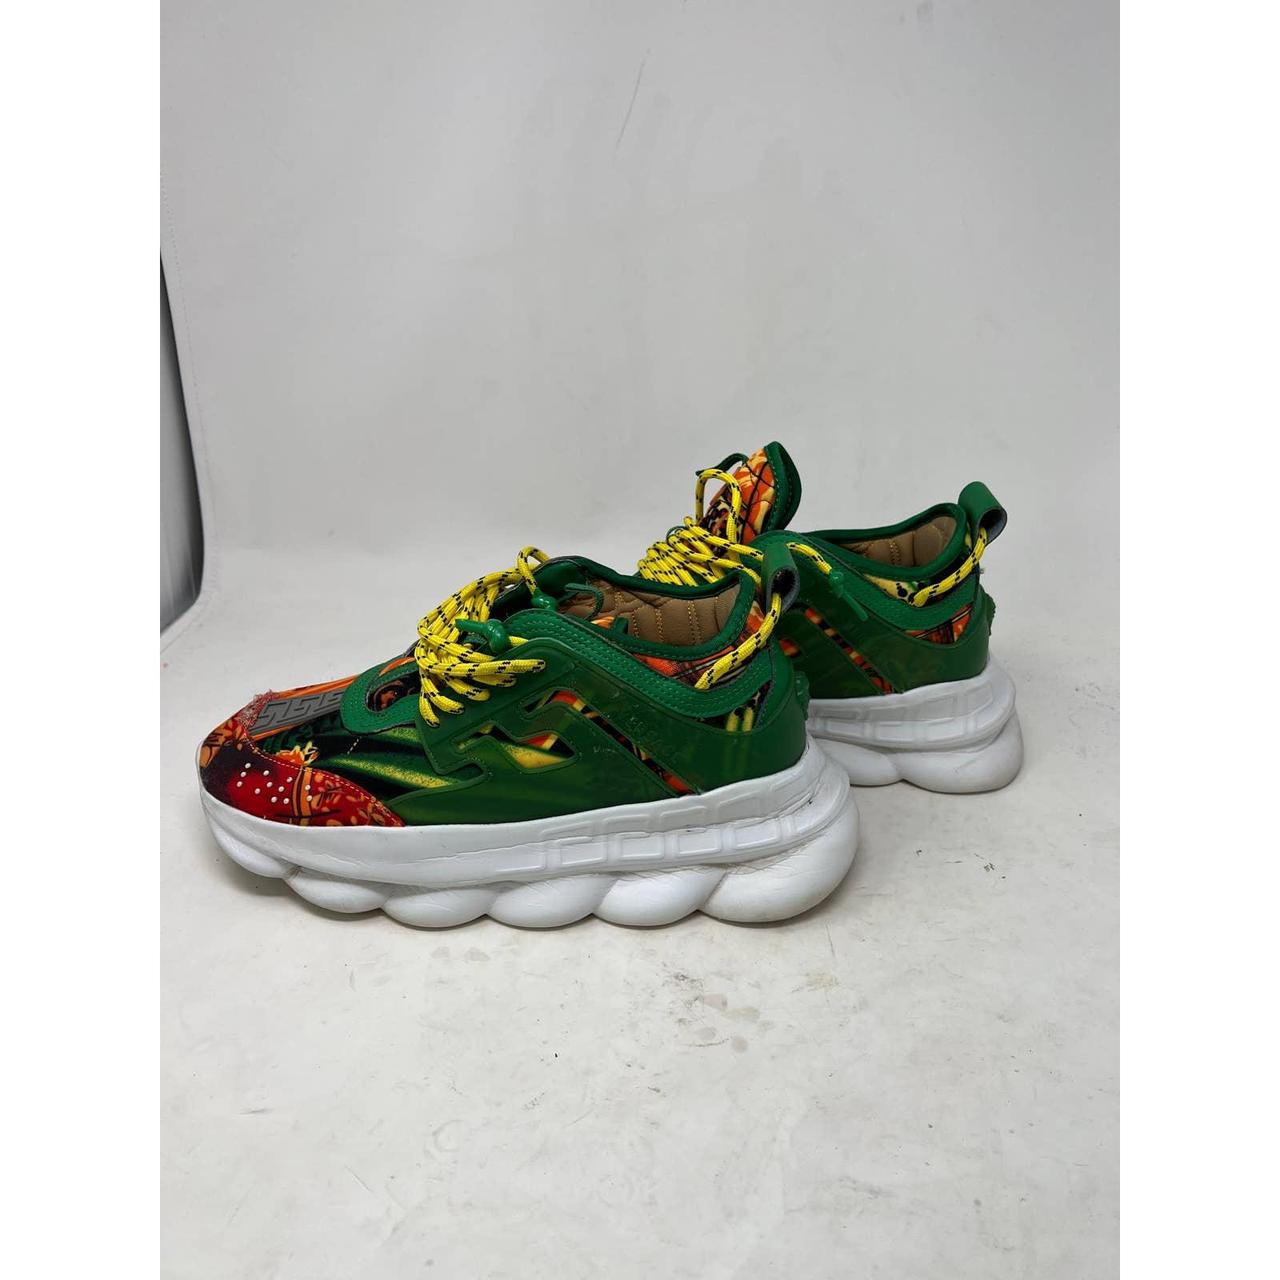 Versace, Shoes, Versace Chain Reaction Shoes Greenyellow